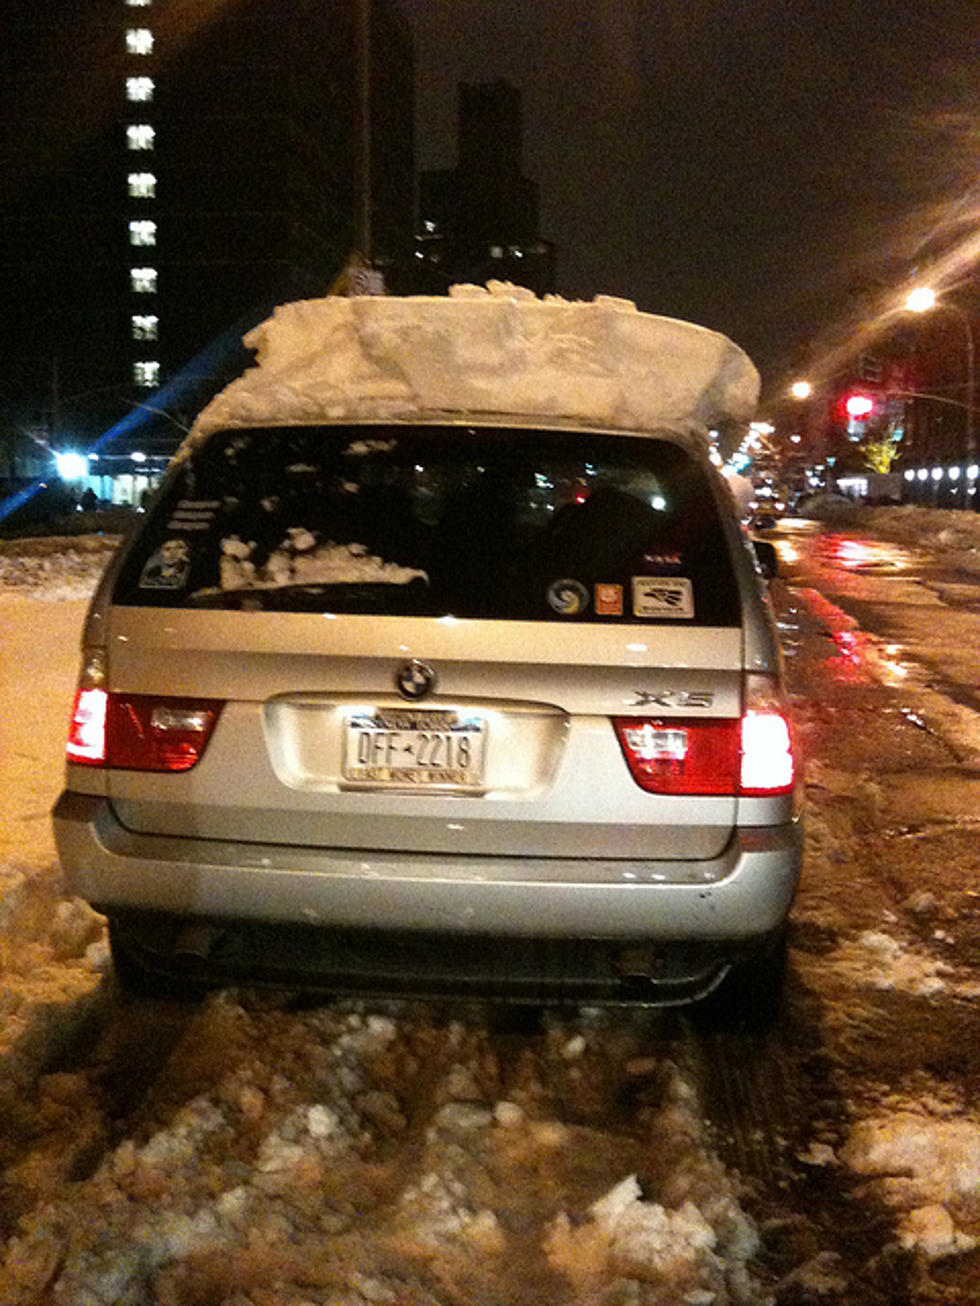 Should Michigan Join New Jersey And Make Driving With Snow On Roof Illegal?